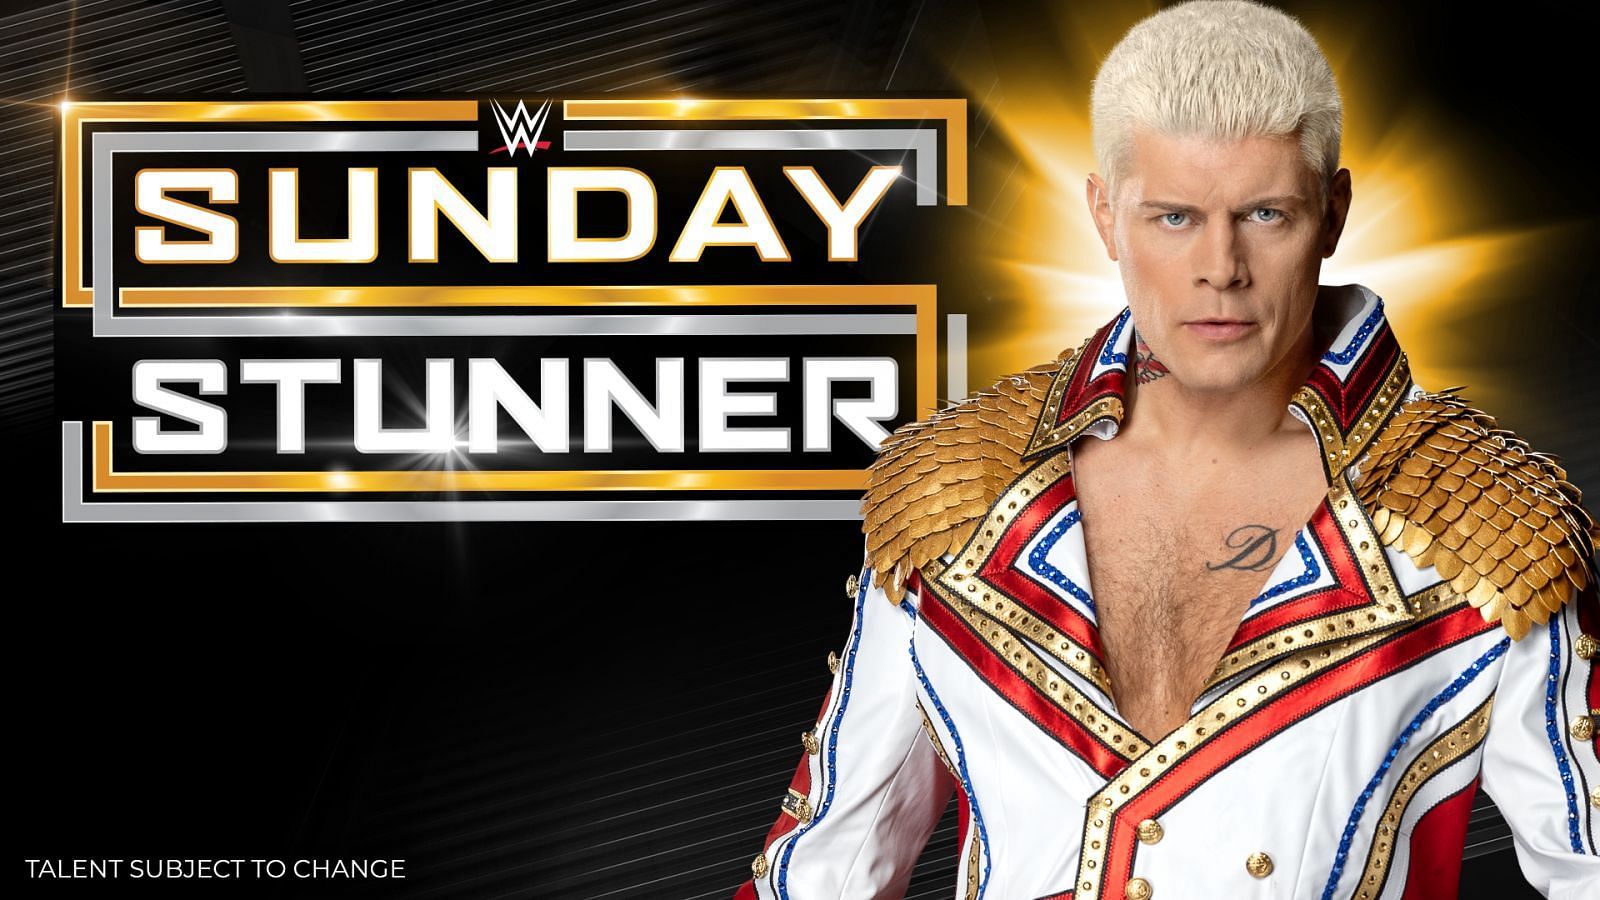 WWE Superstars appearing at Sunday Stunner